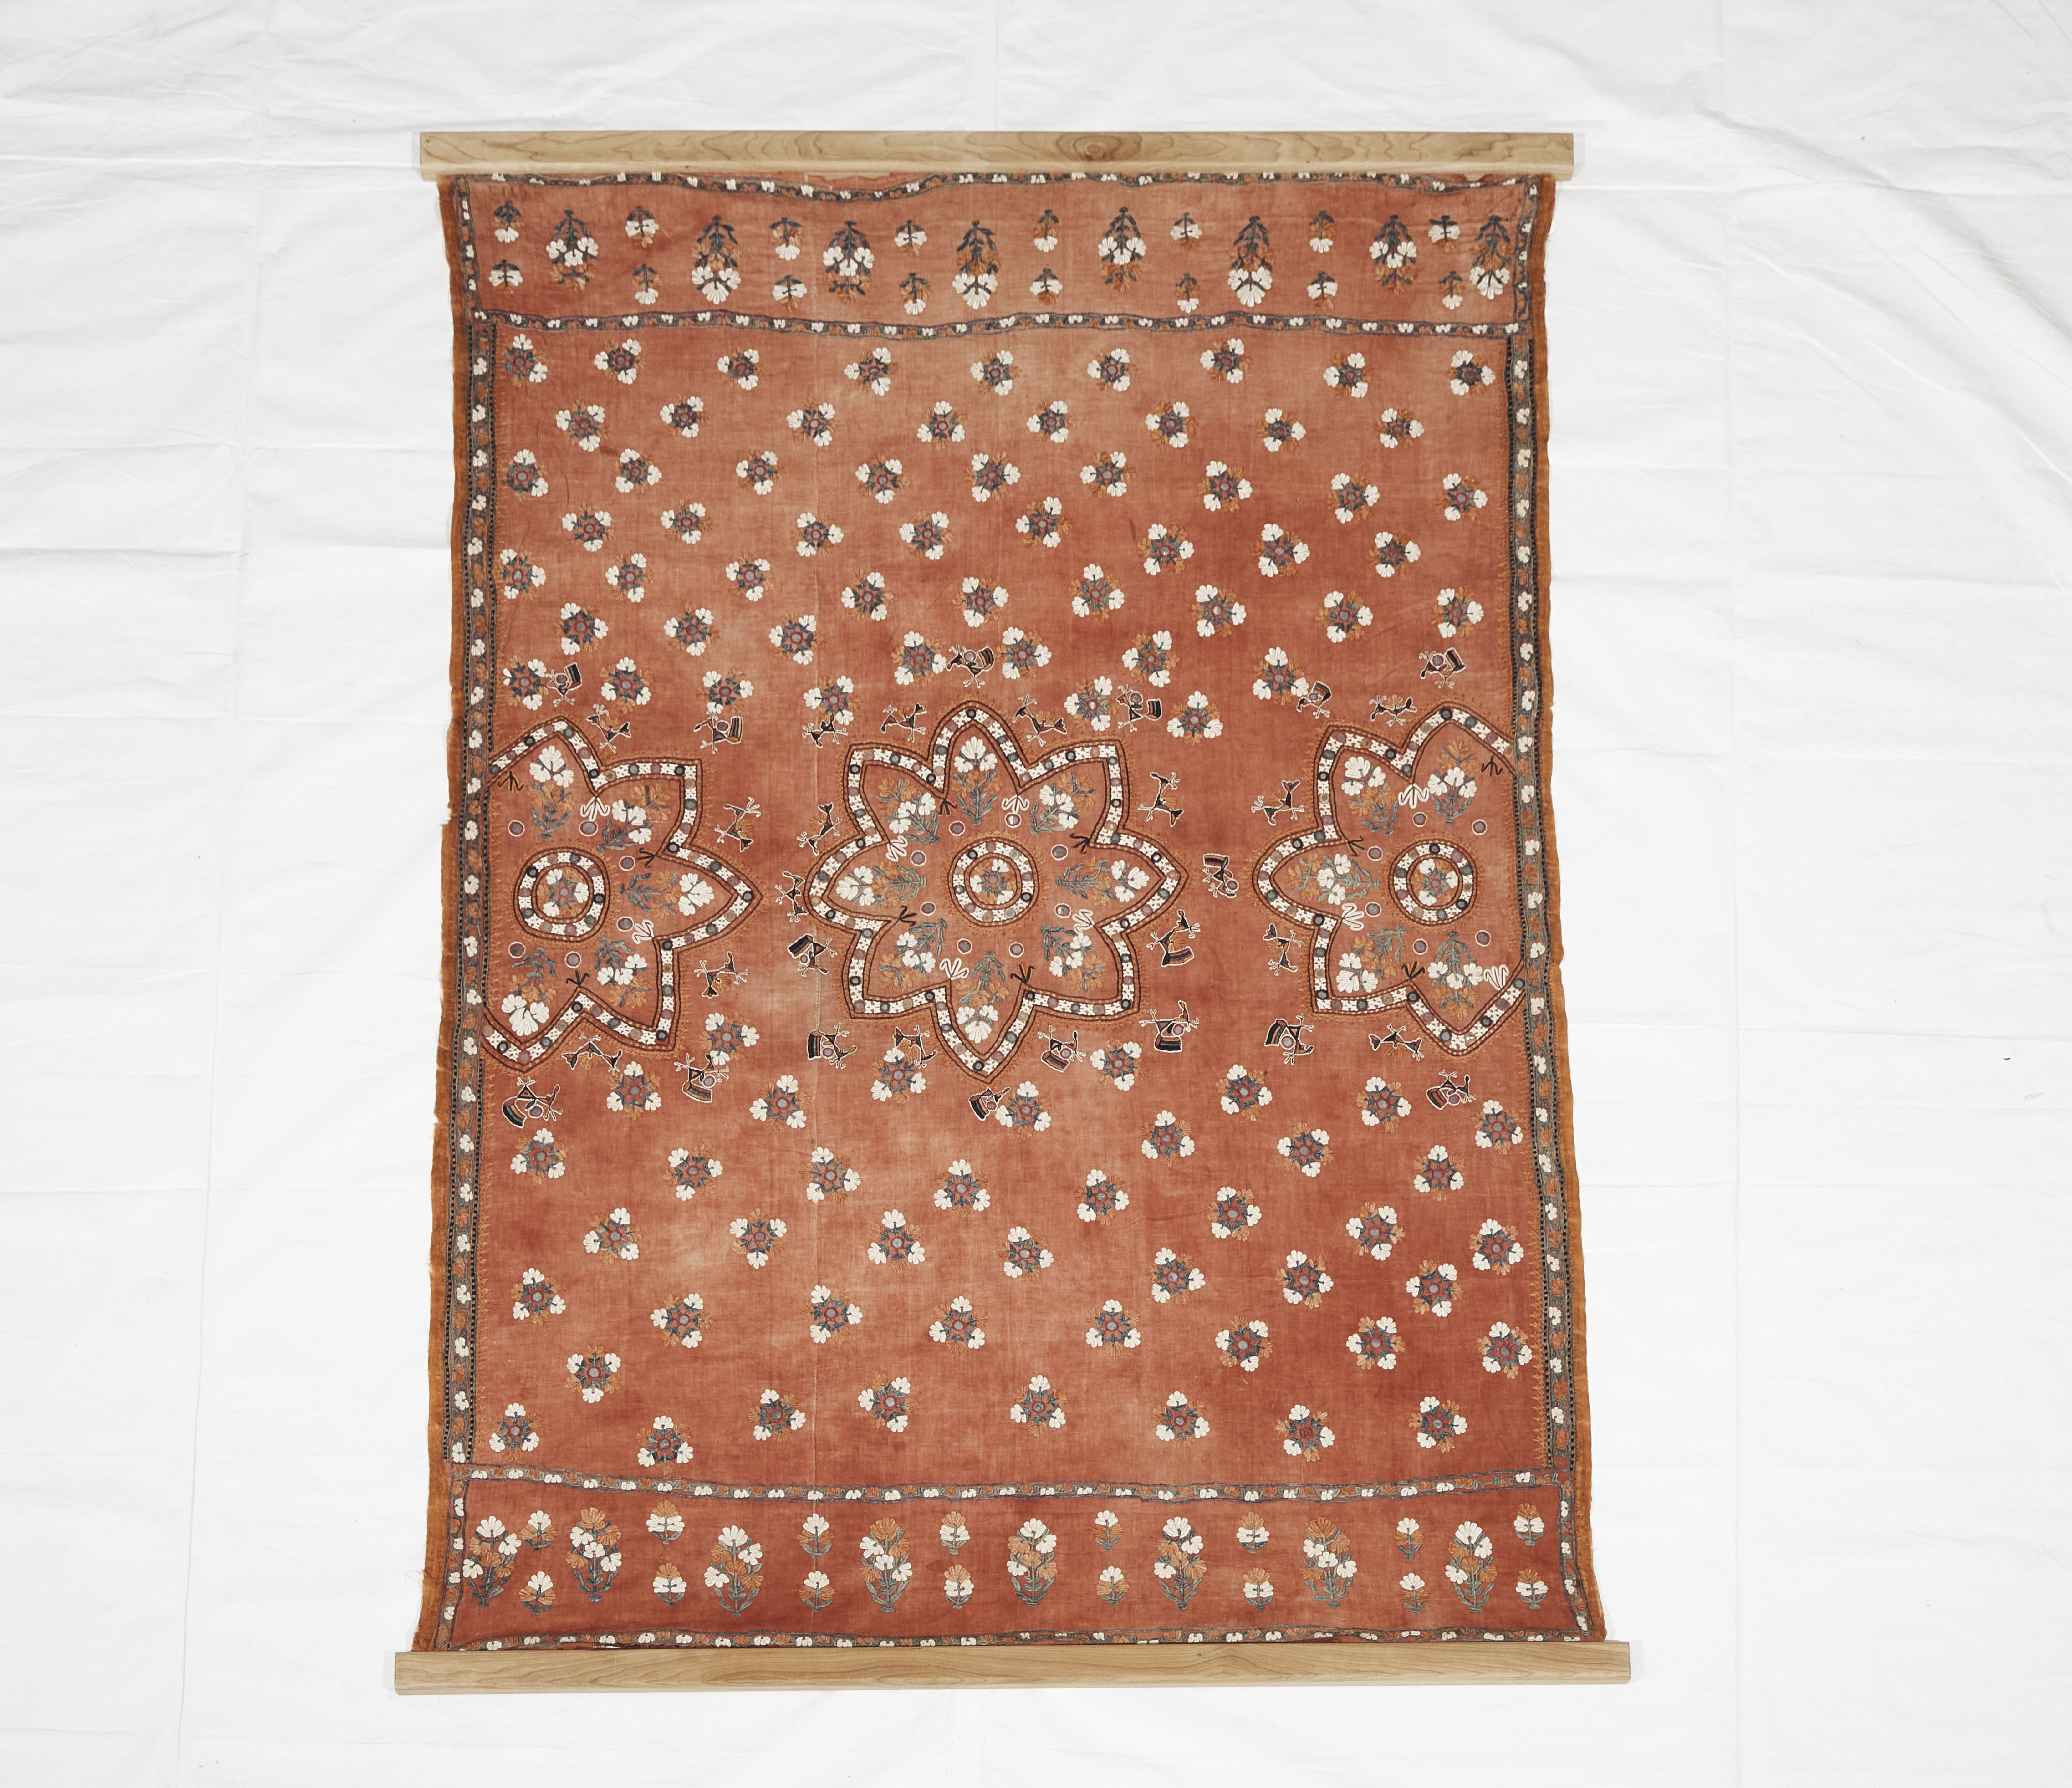 Indian Silk on Cotton Embroidered Table or Bed Cover with Mirrored Disc Inserts, late 19th to early 20th century